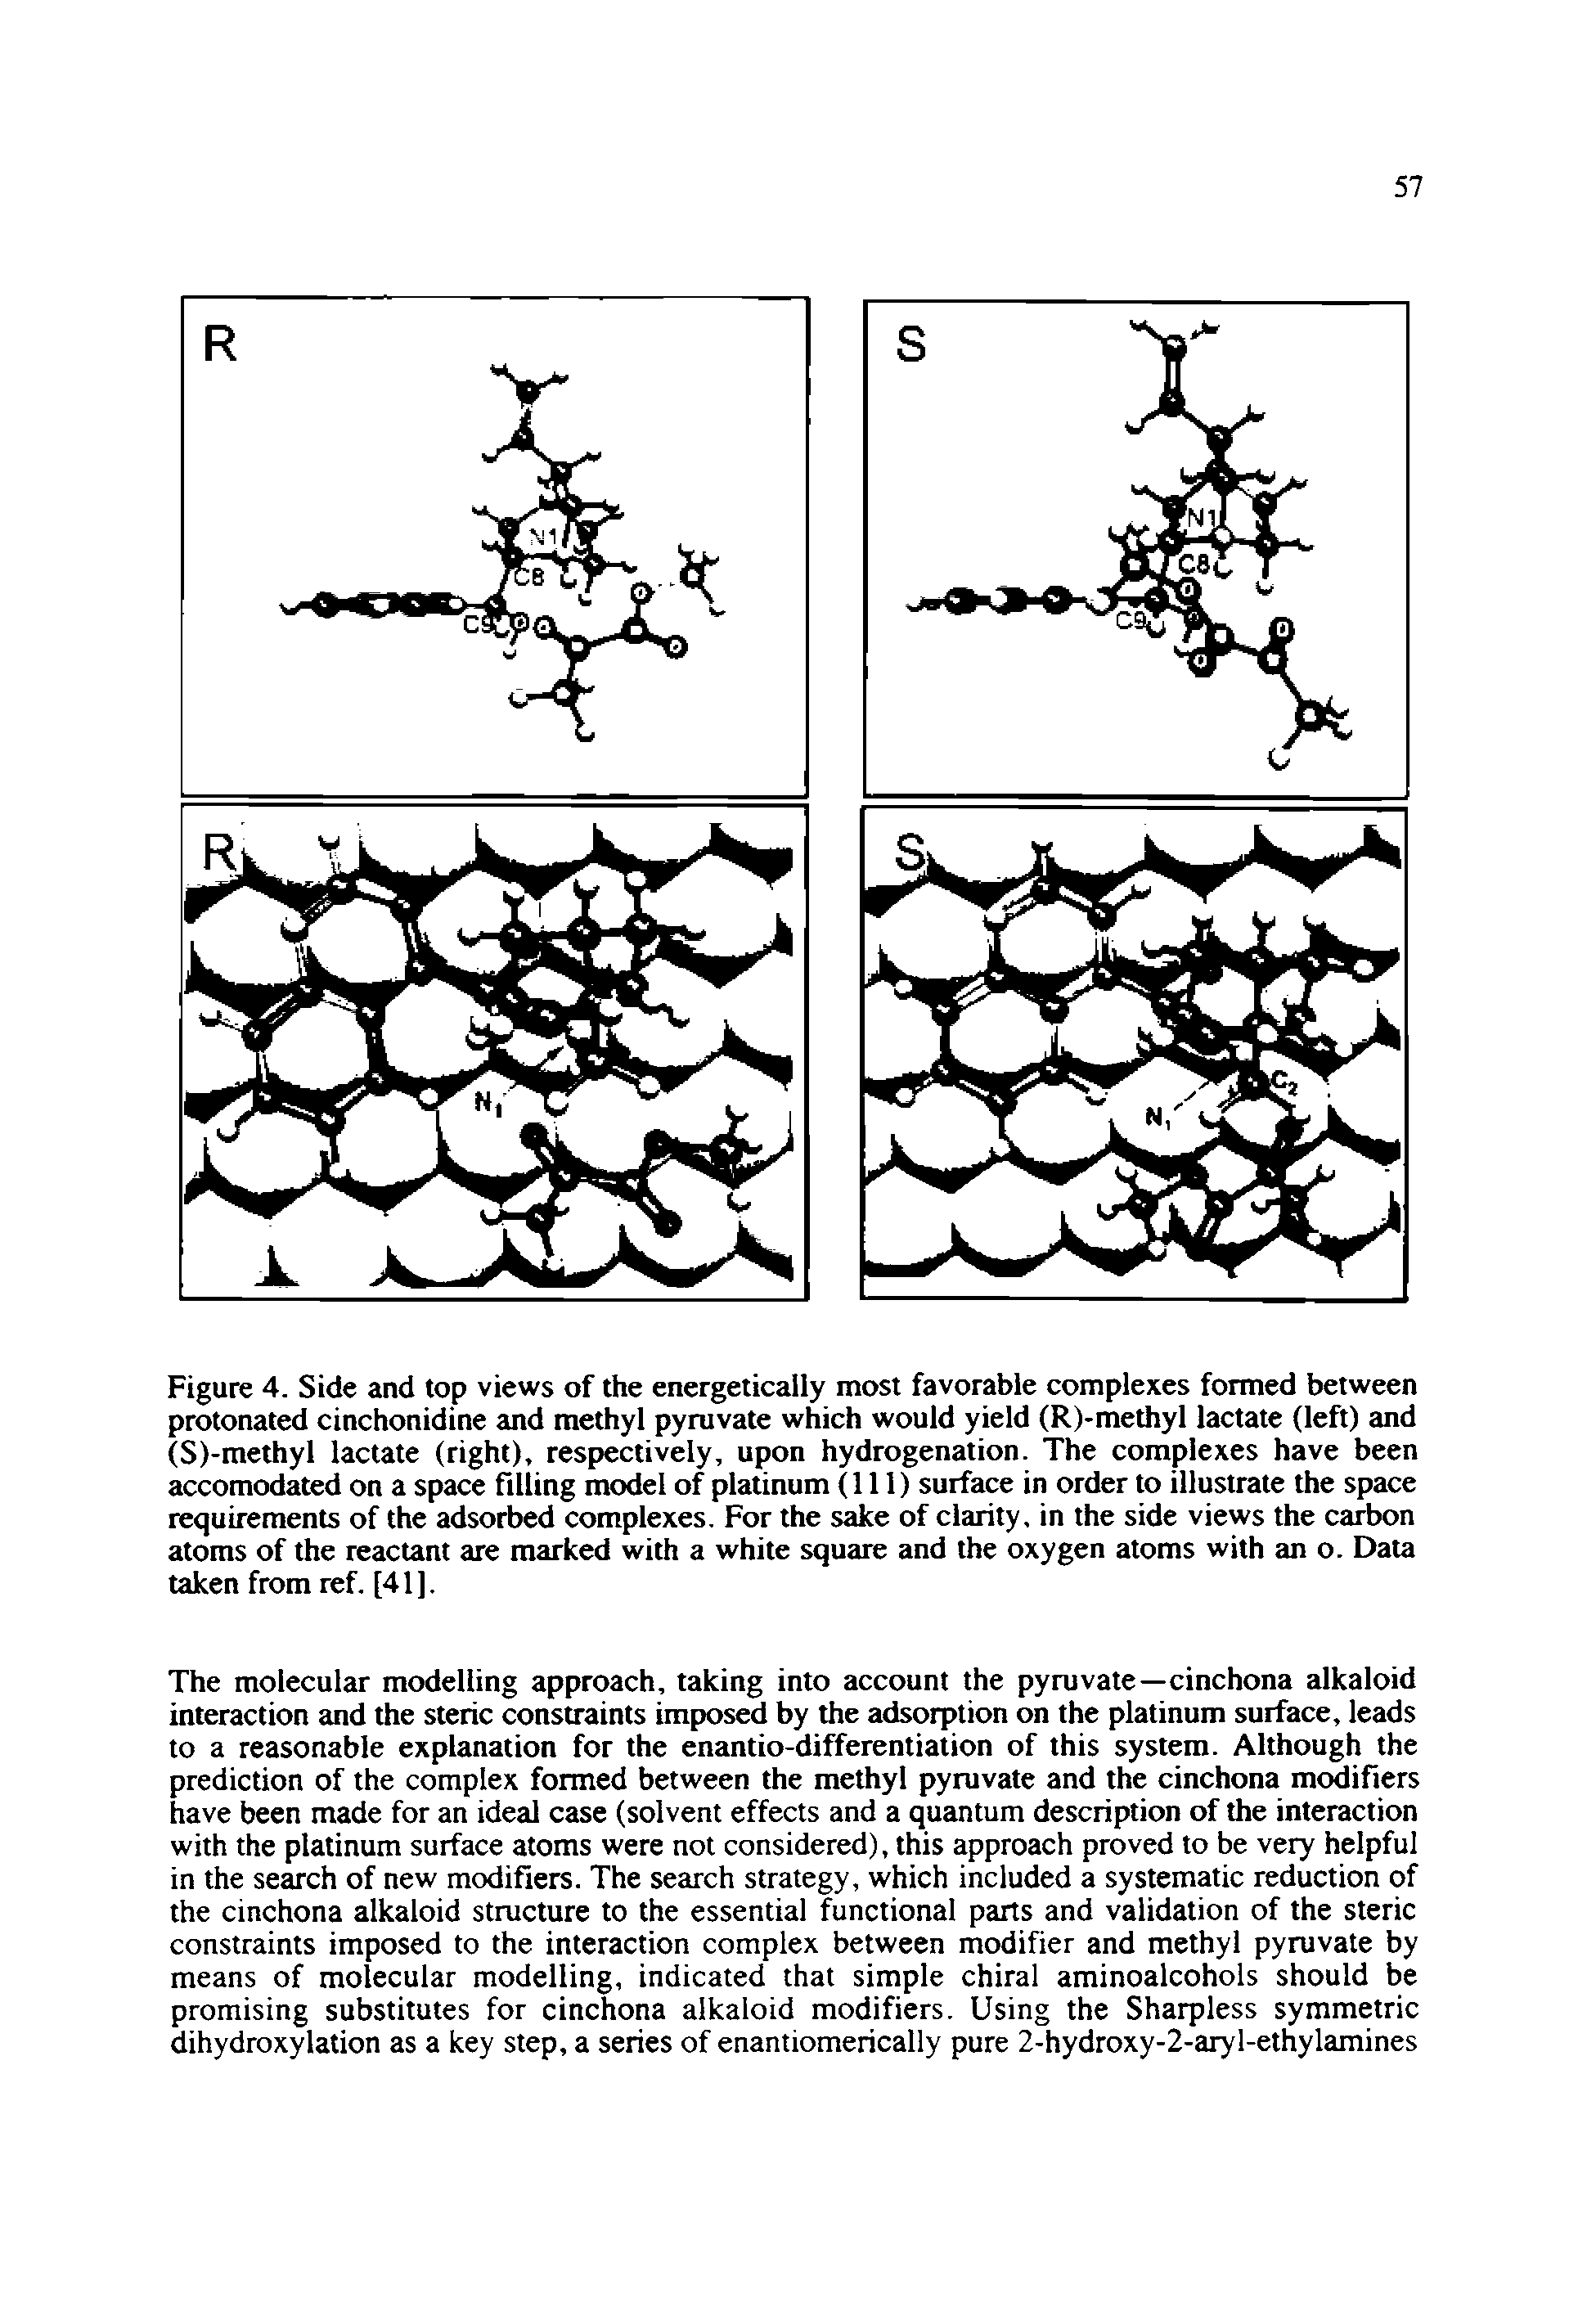 Figure 4. Side and top views of the energetically most favorable complexes formed between protonated cinchonidine and methyl pyruvate which would yield (R)-methyl lactate (left) and (S)-methyl lactate (right), respectively, upon hydrogenation. The complexes have been accomodated on a space filling model of platinum (111) surface in order to illustrate the space requirements of the adsorbed complexes. For the sake of clarity, in the side views the carbon atoms of the reactant are marked with a white square and the oxygen atoms with an o. Data taken from ref. [41].